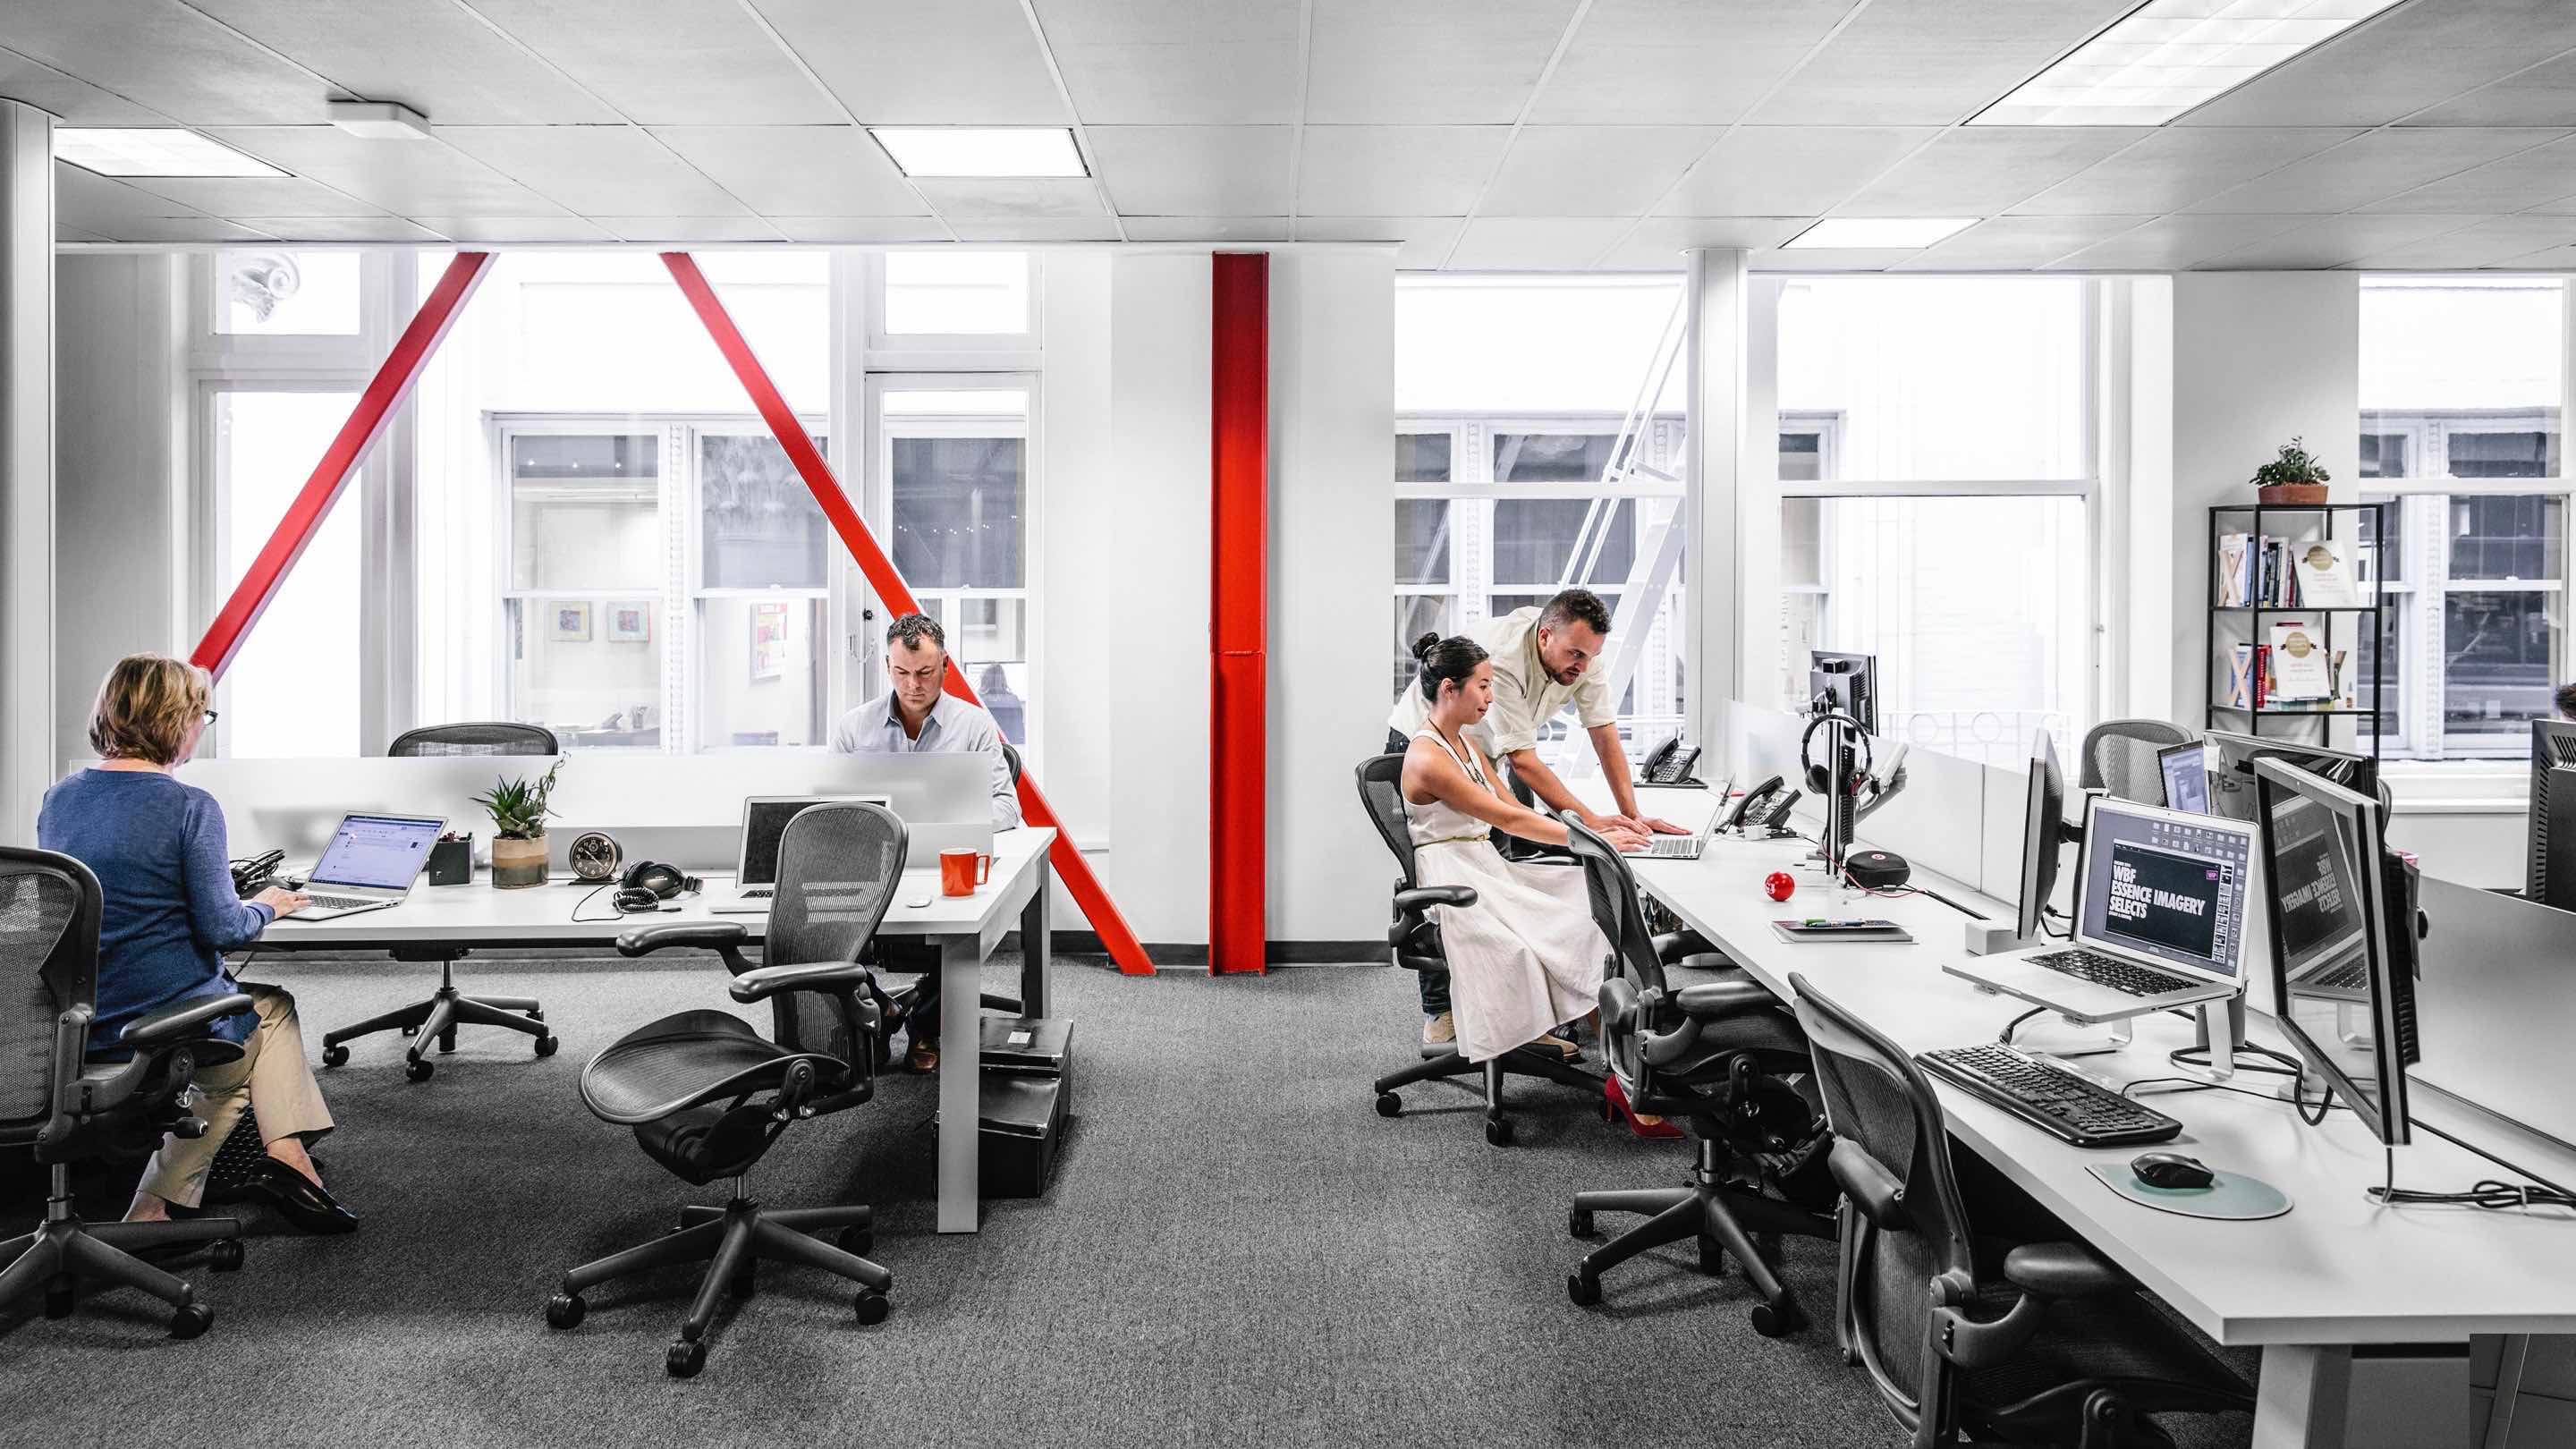 Employees work inside an open office environment with bold red highlights. 